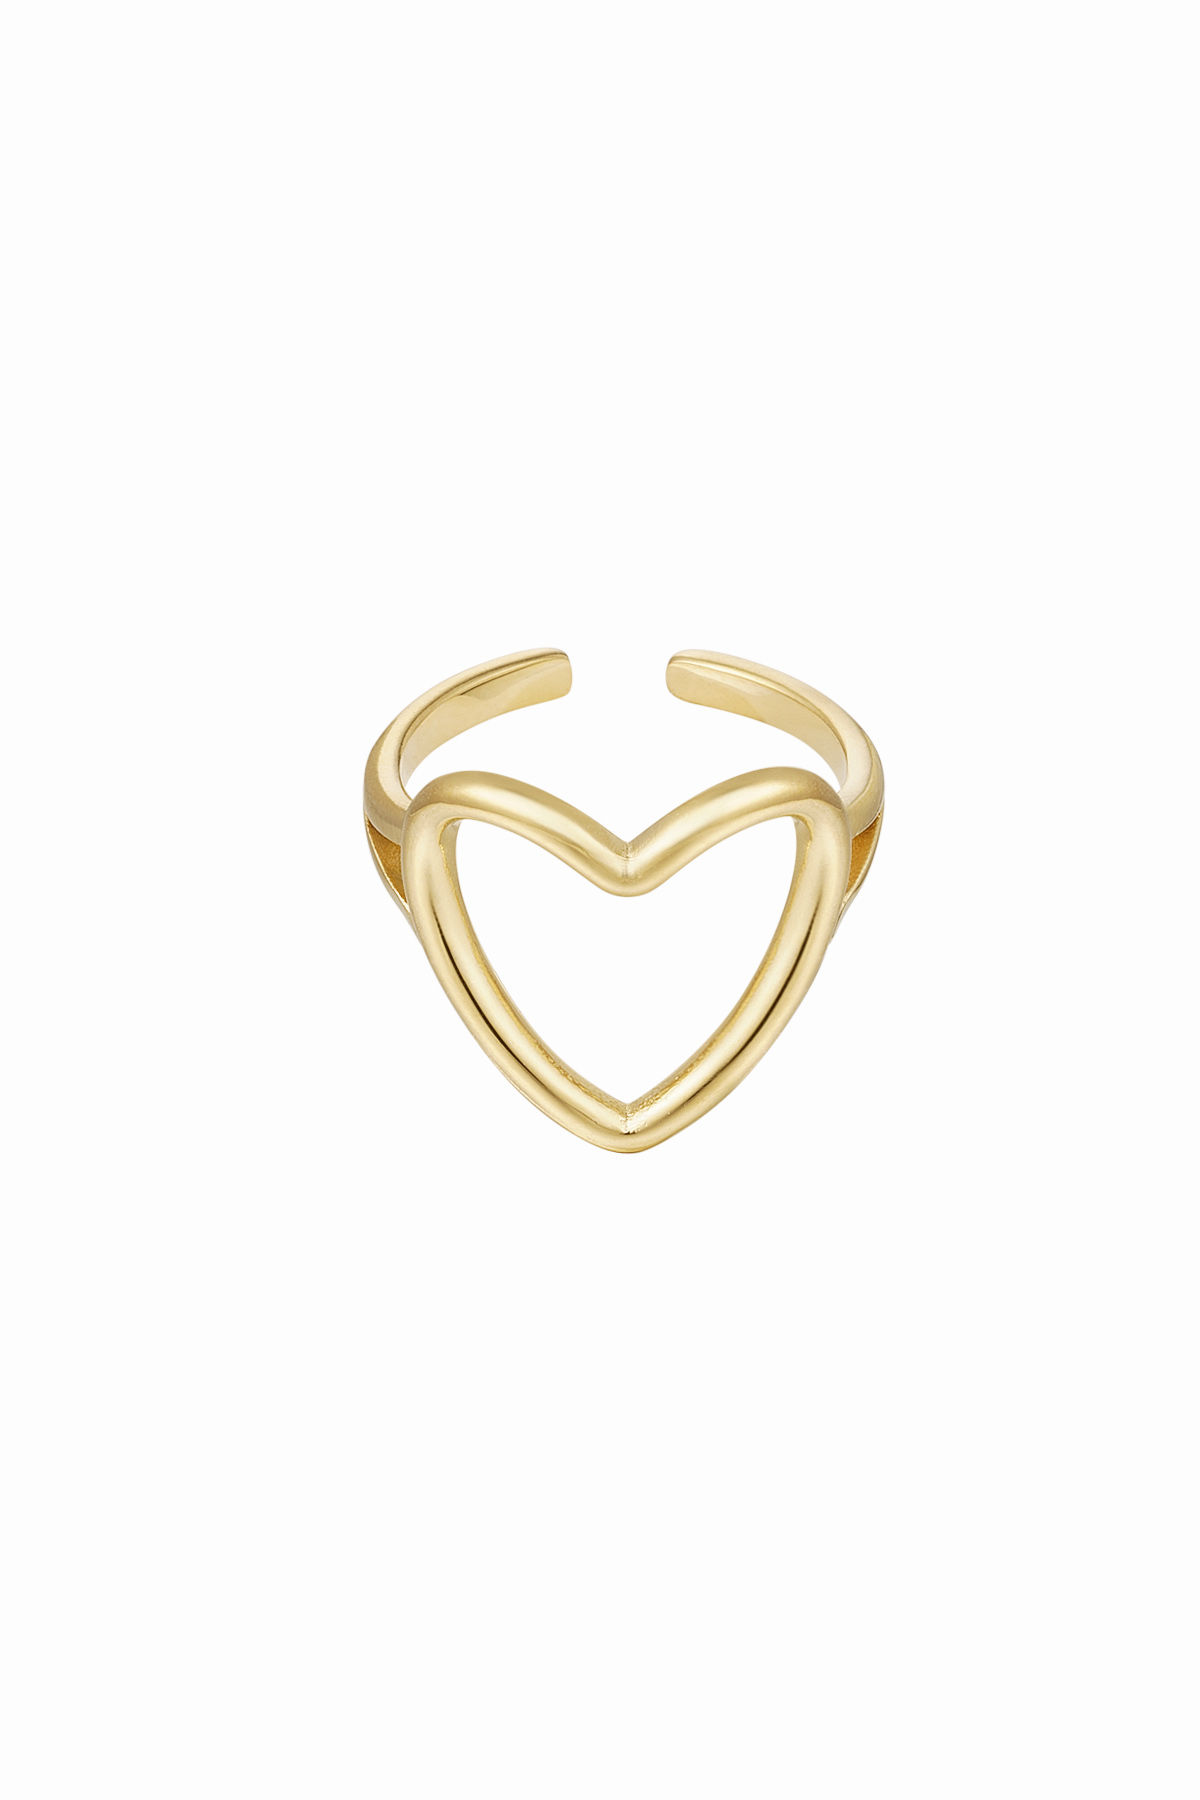 Verstelbare ring hart - goud Stainless Steel One size